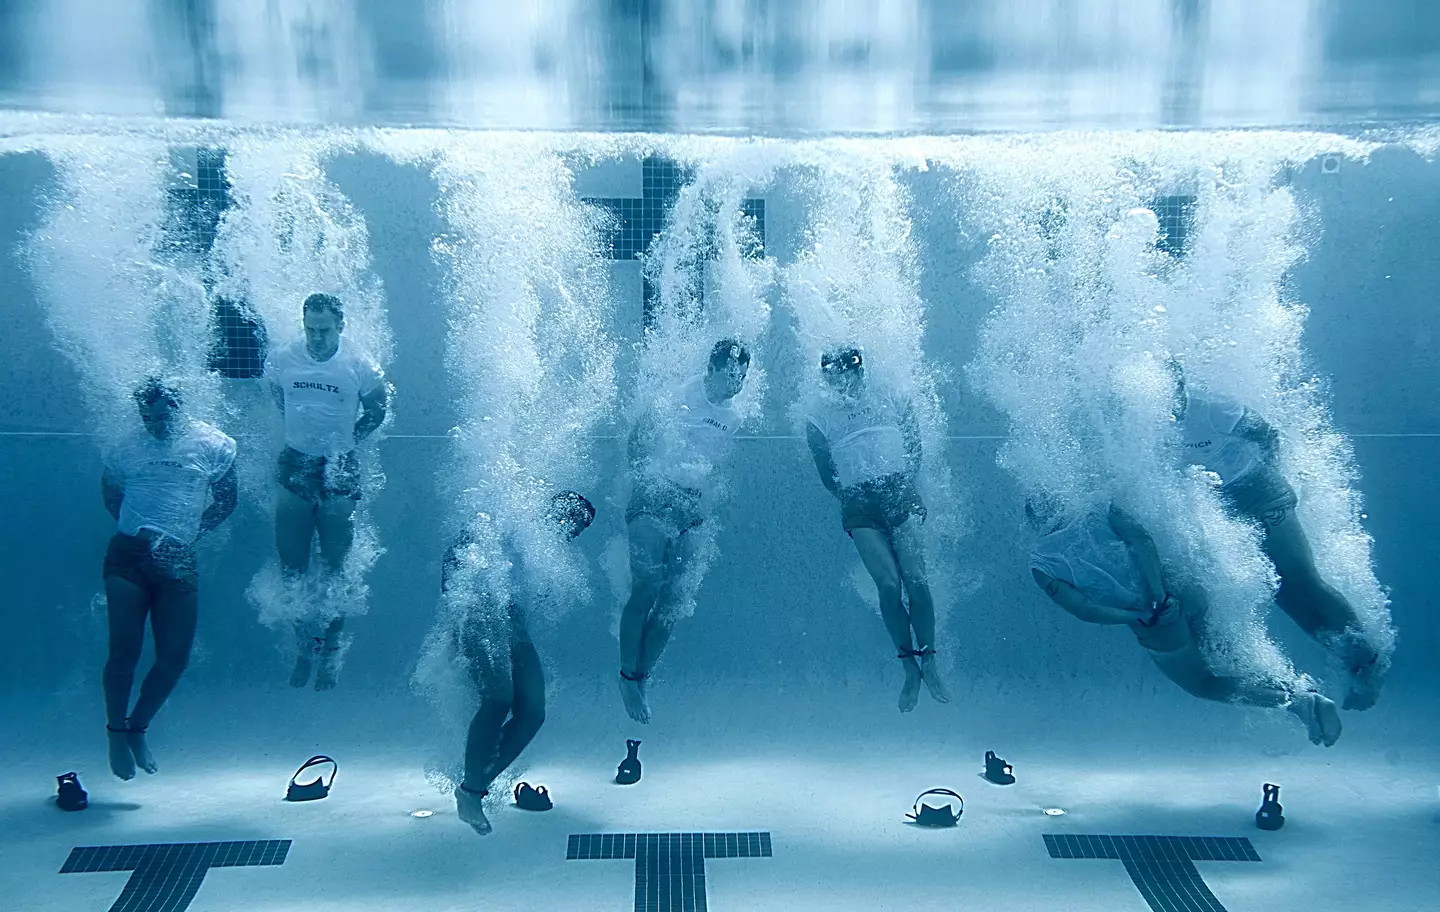 U.S Navy SEALs sink to the bottom of a pool with their hands and feet bound during drown proofing exercises at the Naval Special Warfare Center June 23, 2012.